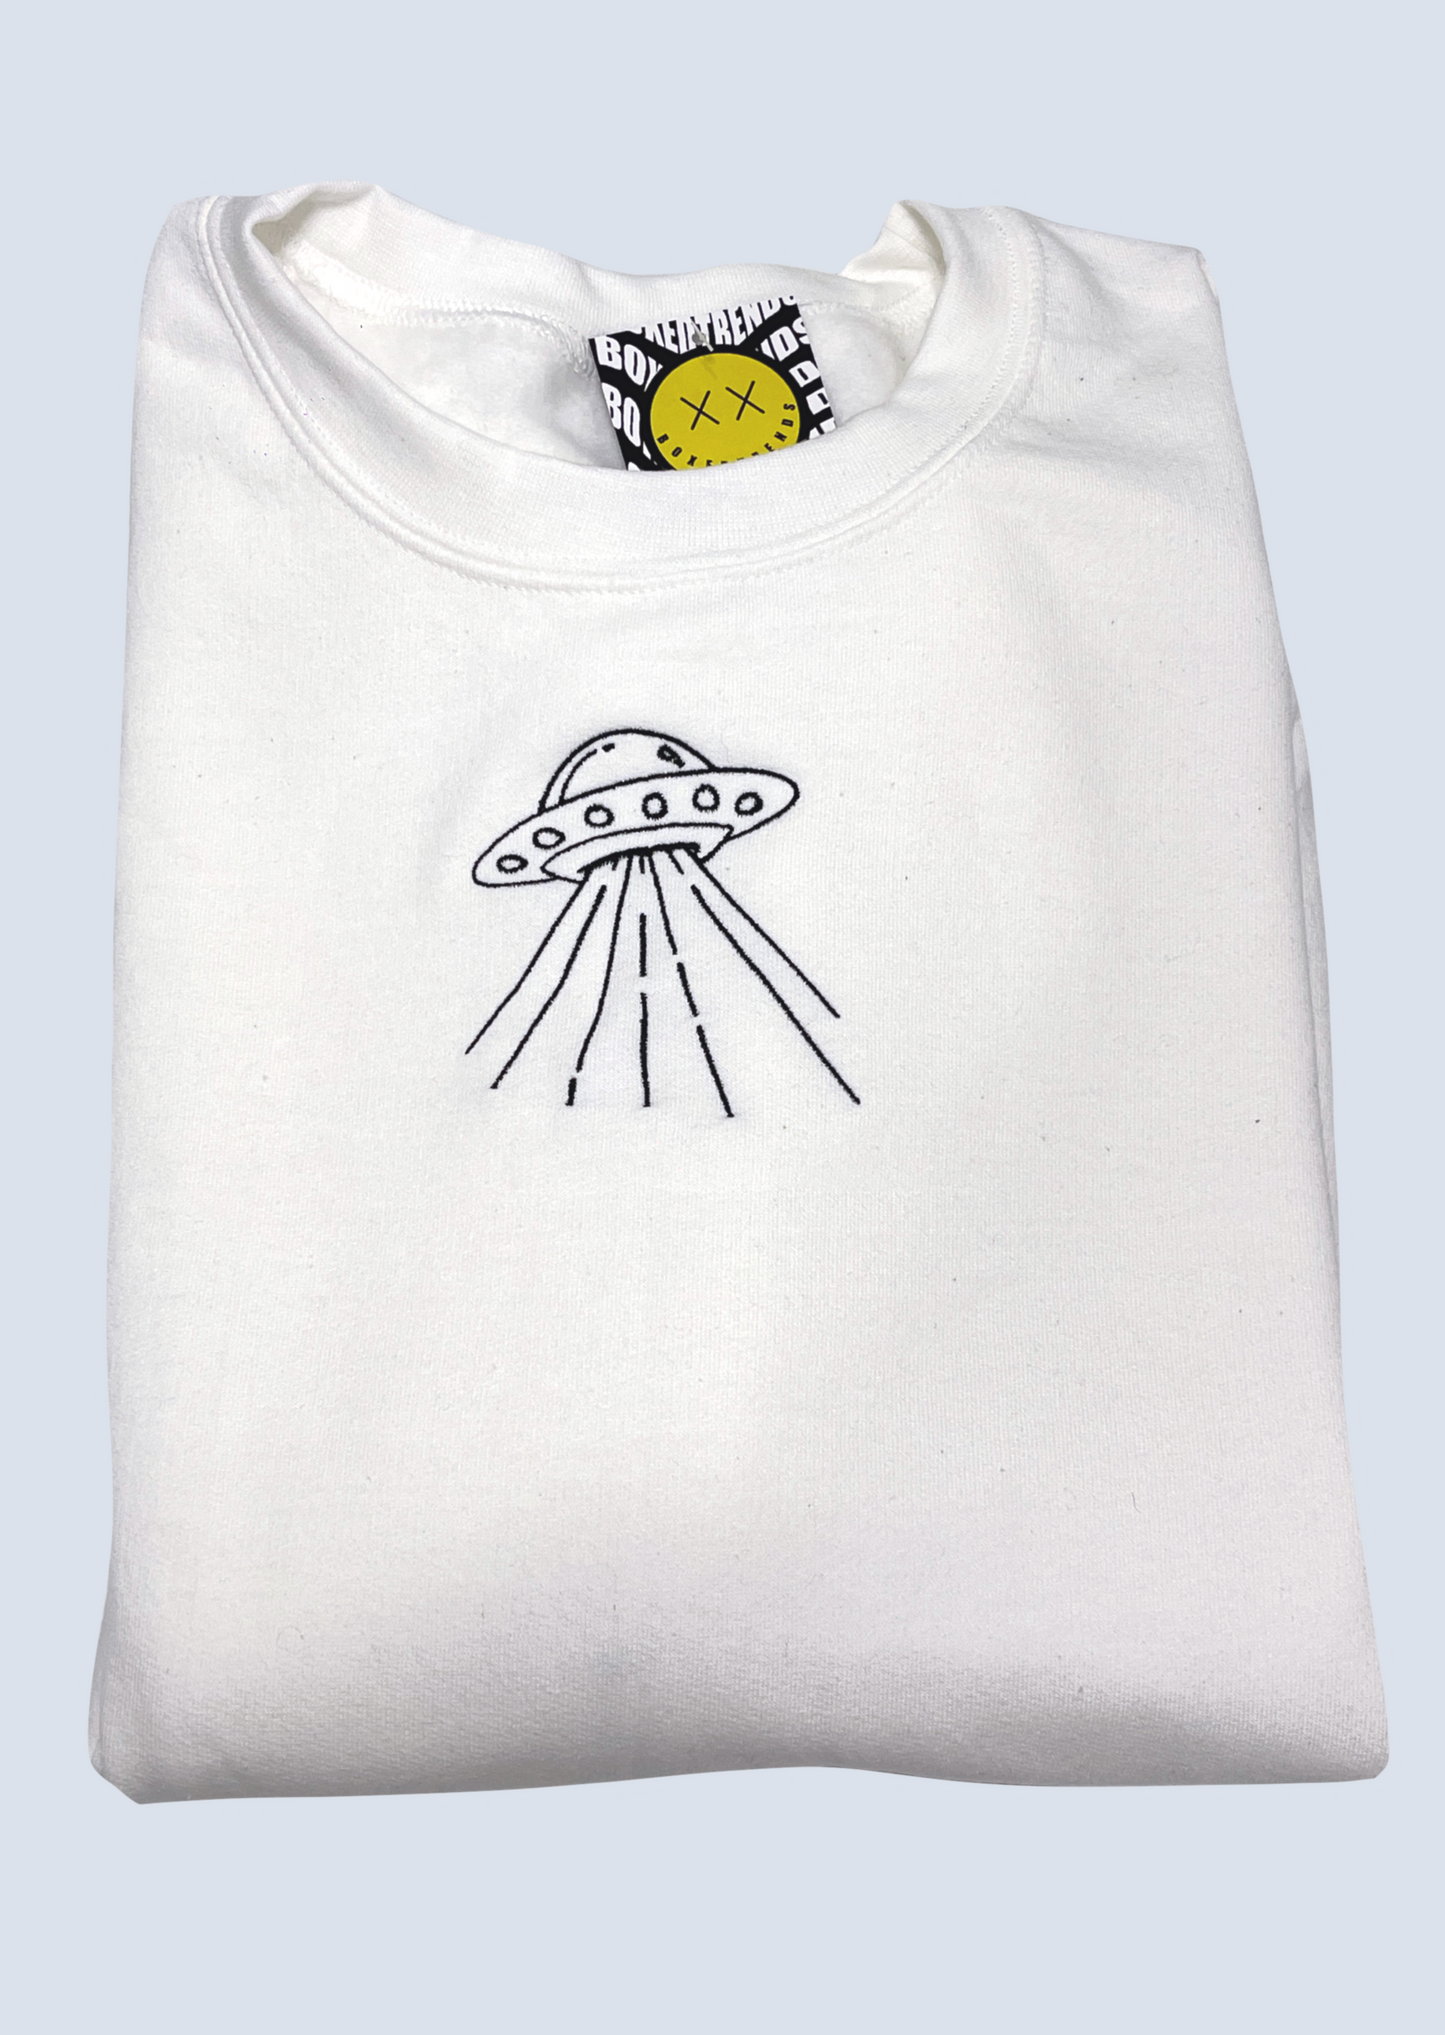 Spaceship and UFO Embroidered Matching Set